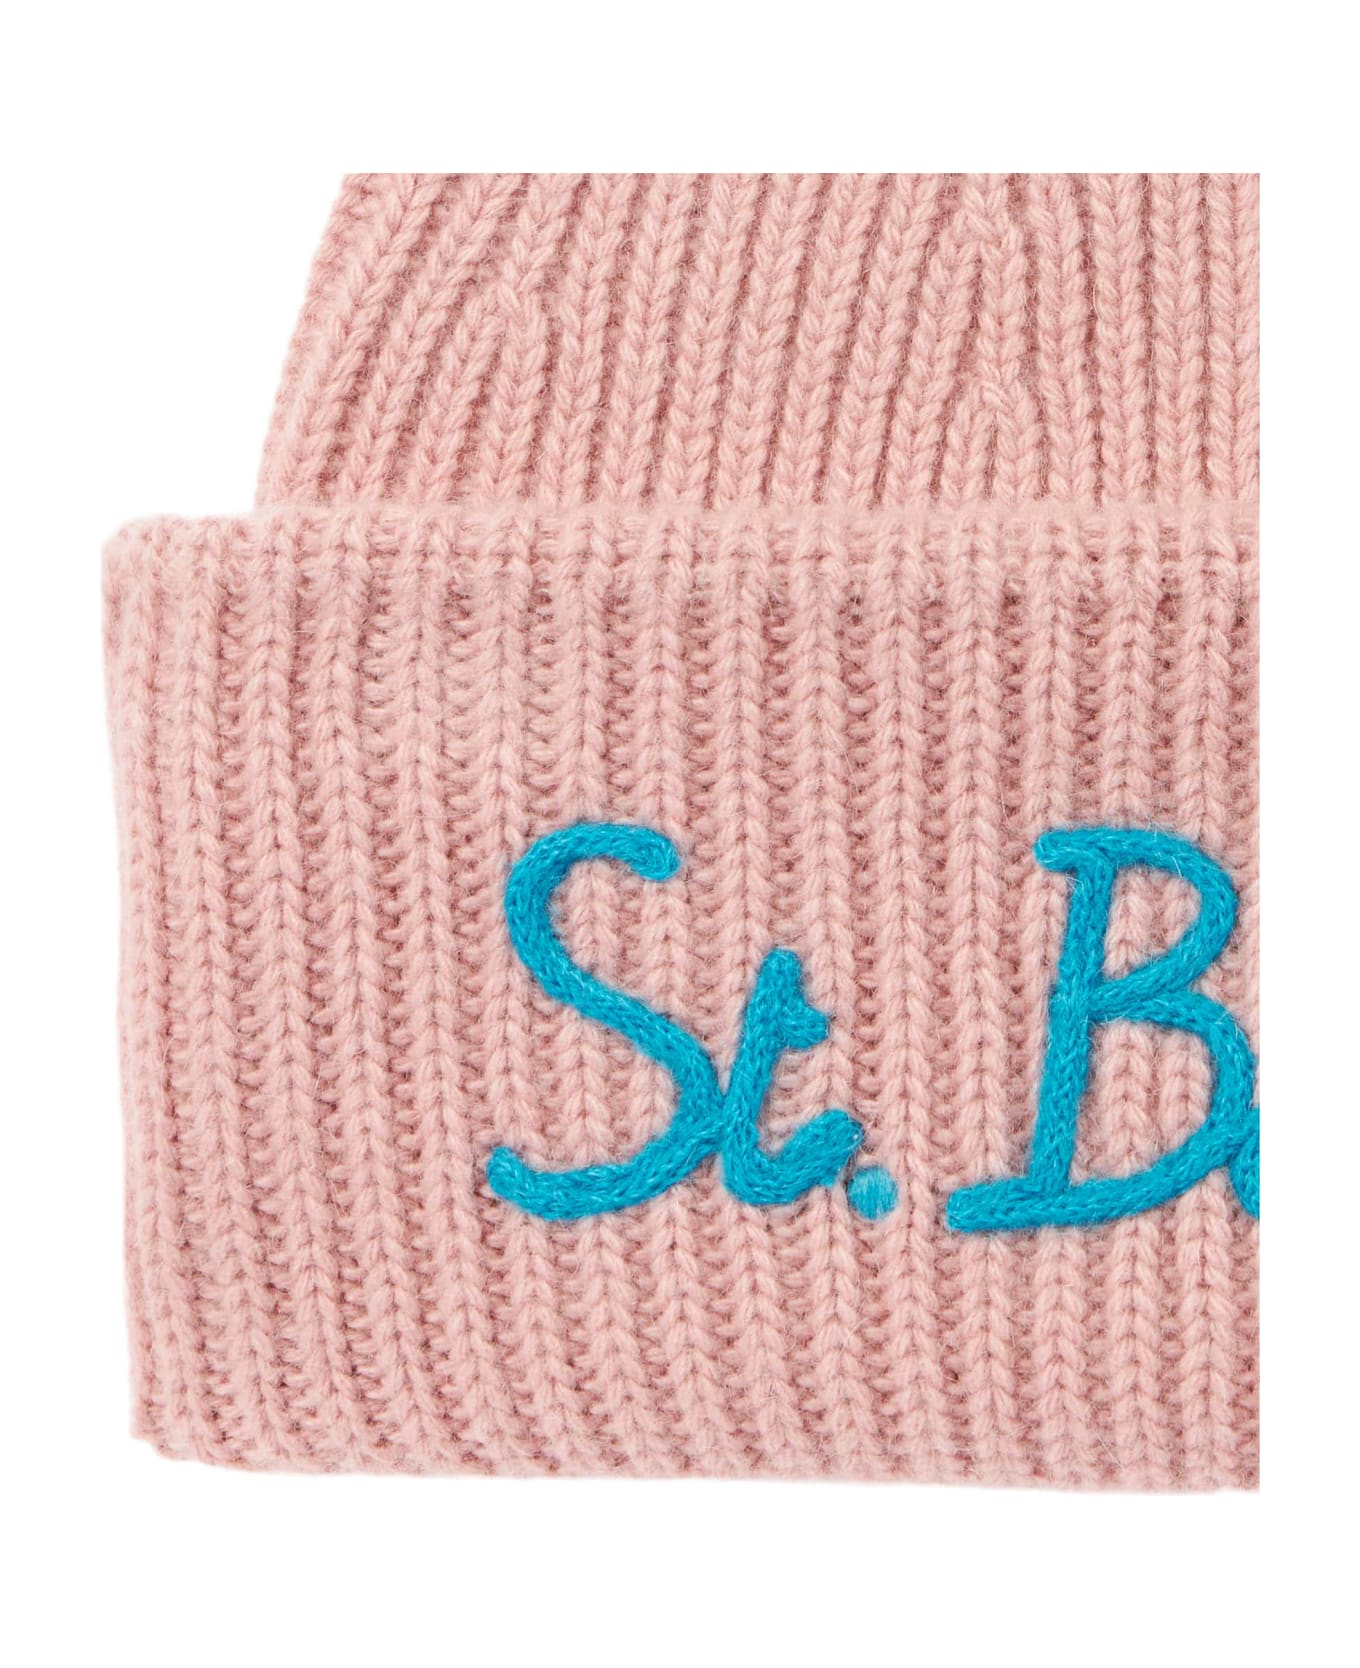 MC2 Saint Barth Woman Knit Beanie With St. Barth Embroidery - PINK